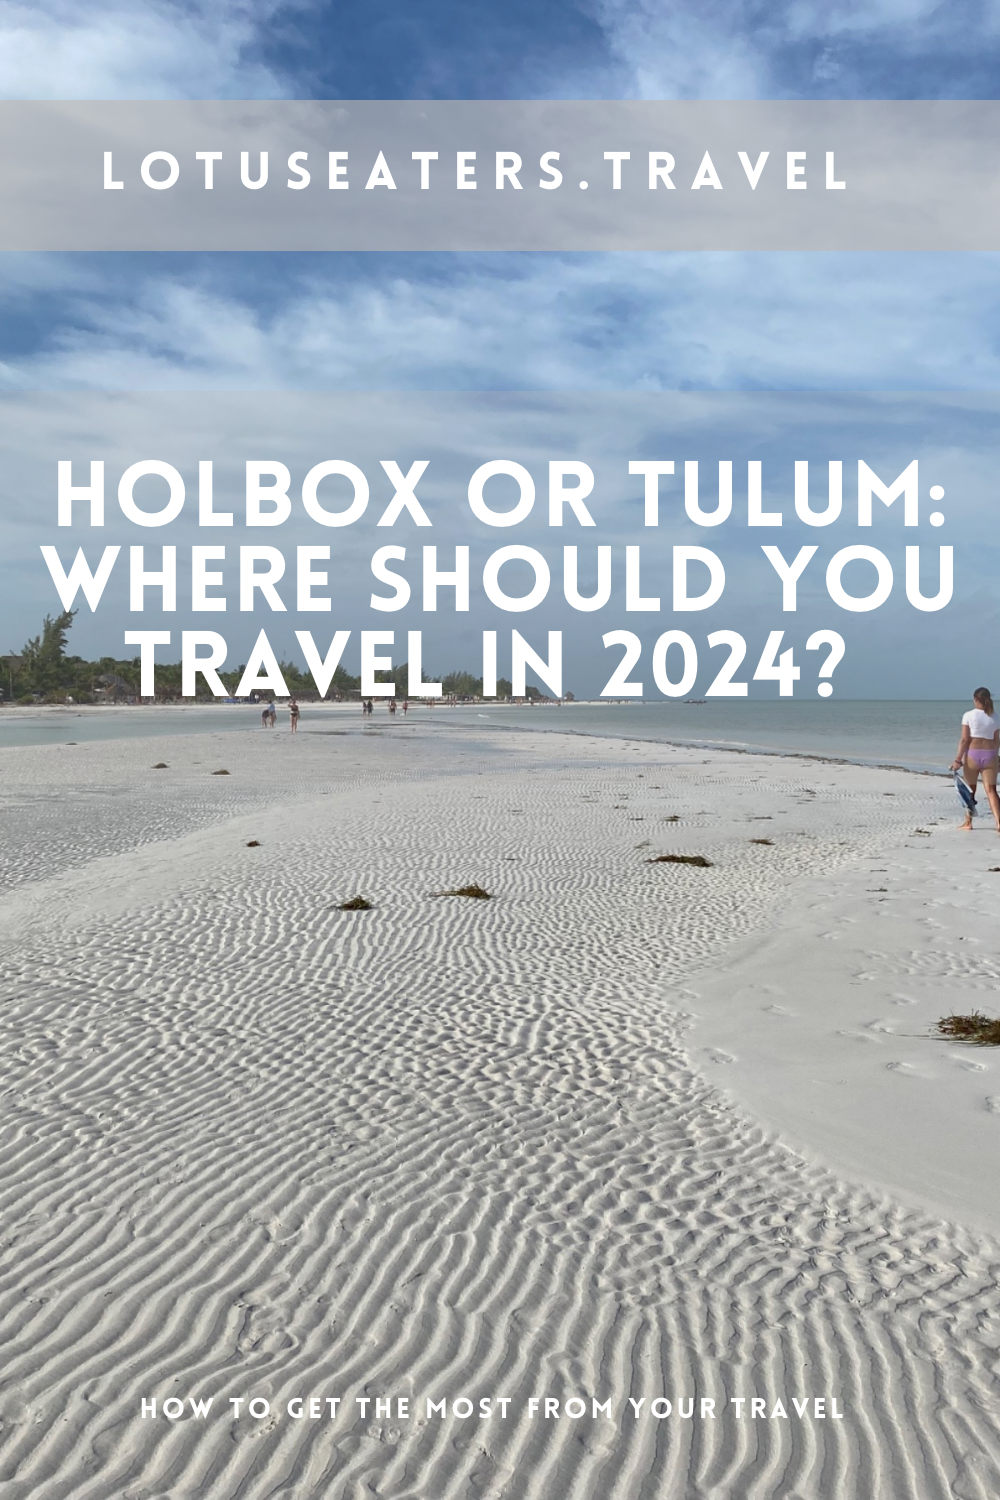 Holbox or Tulum: Where should you travel in 2024?